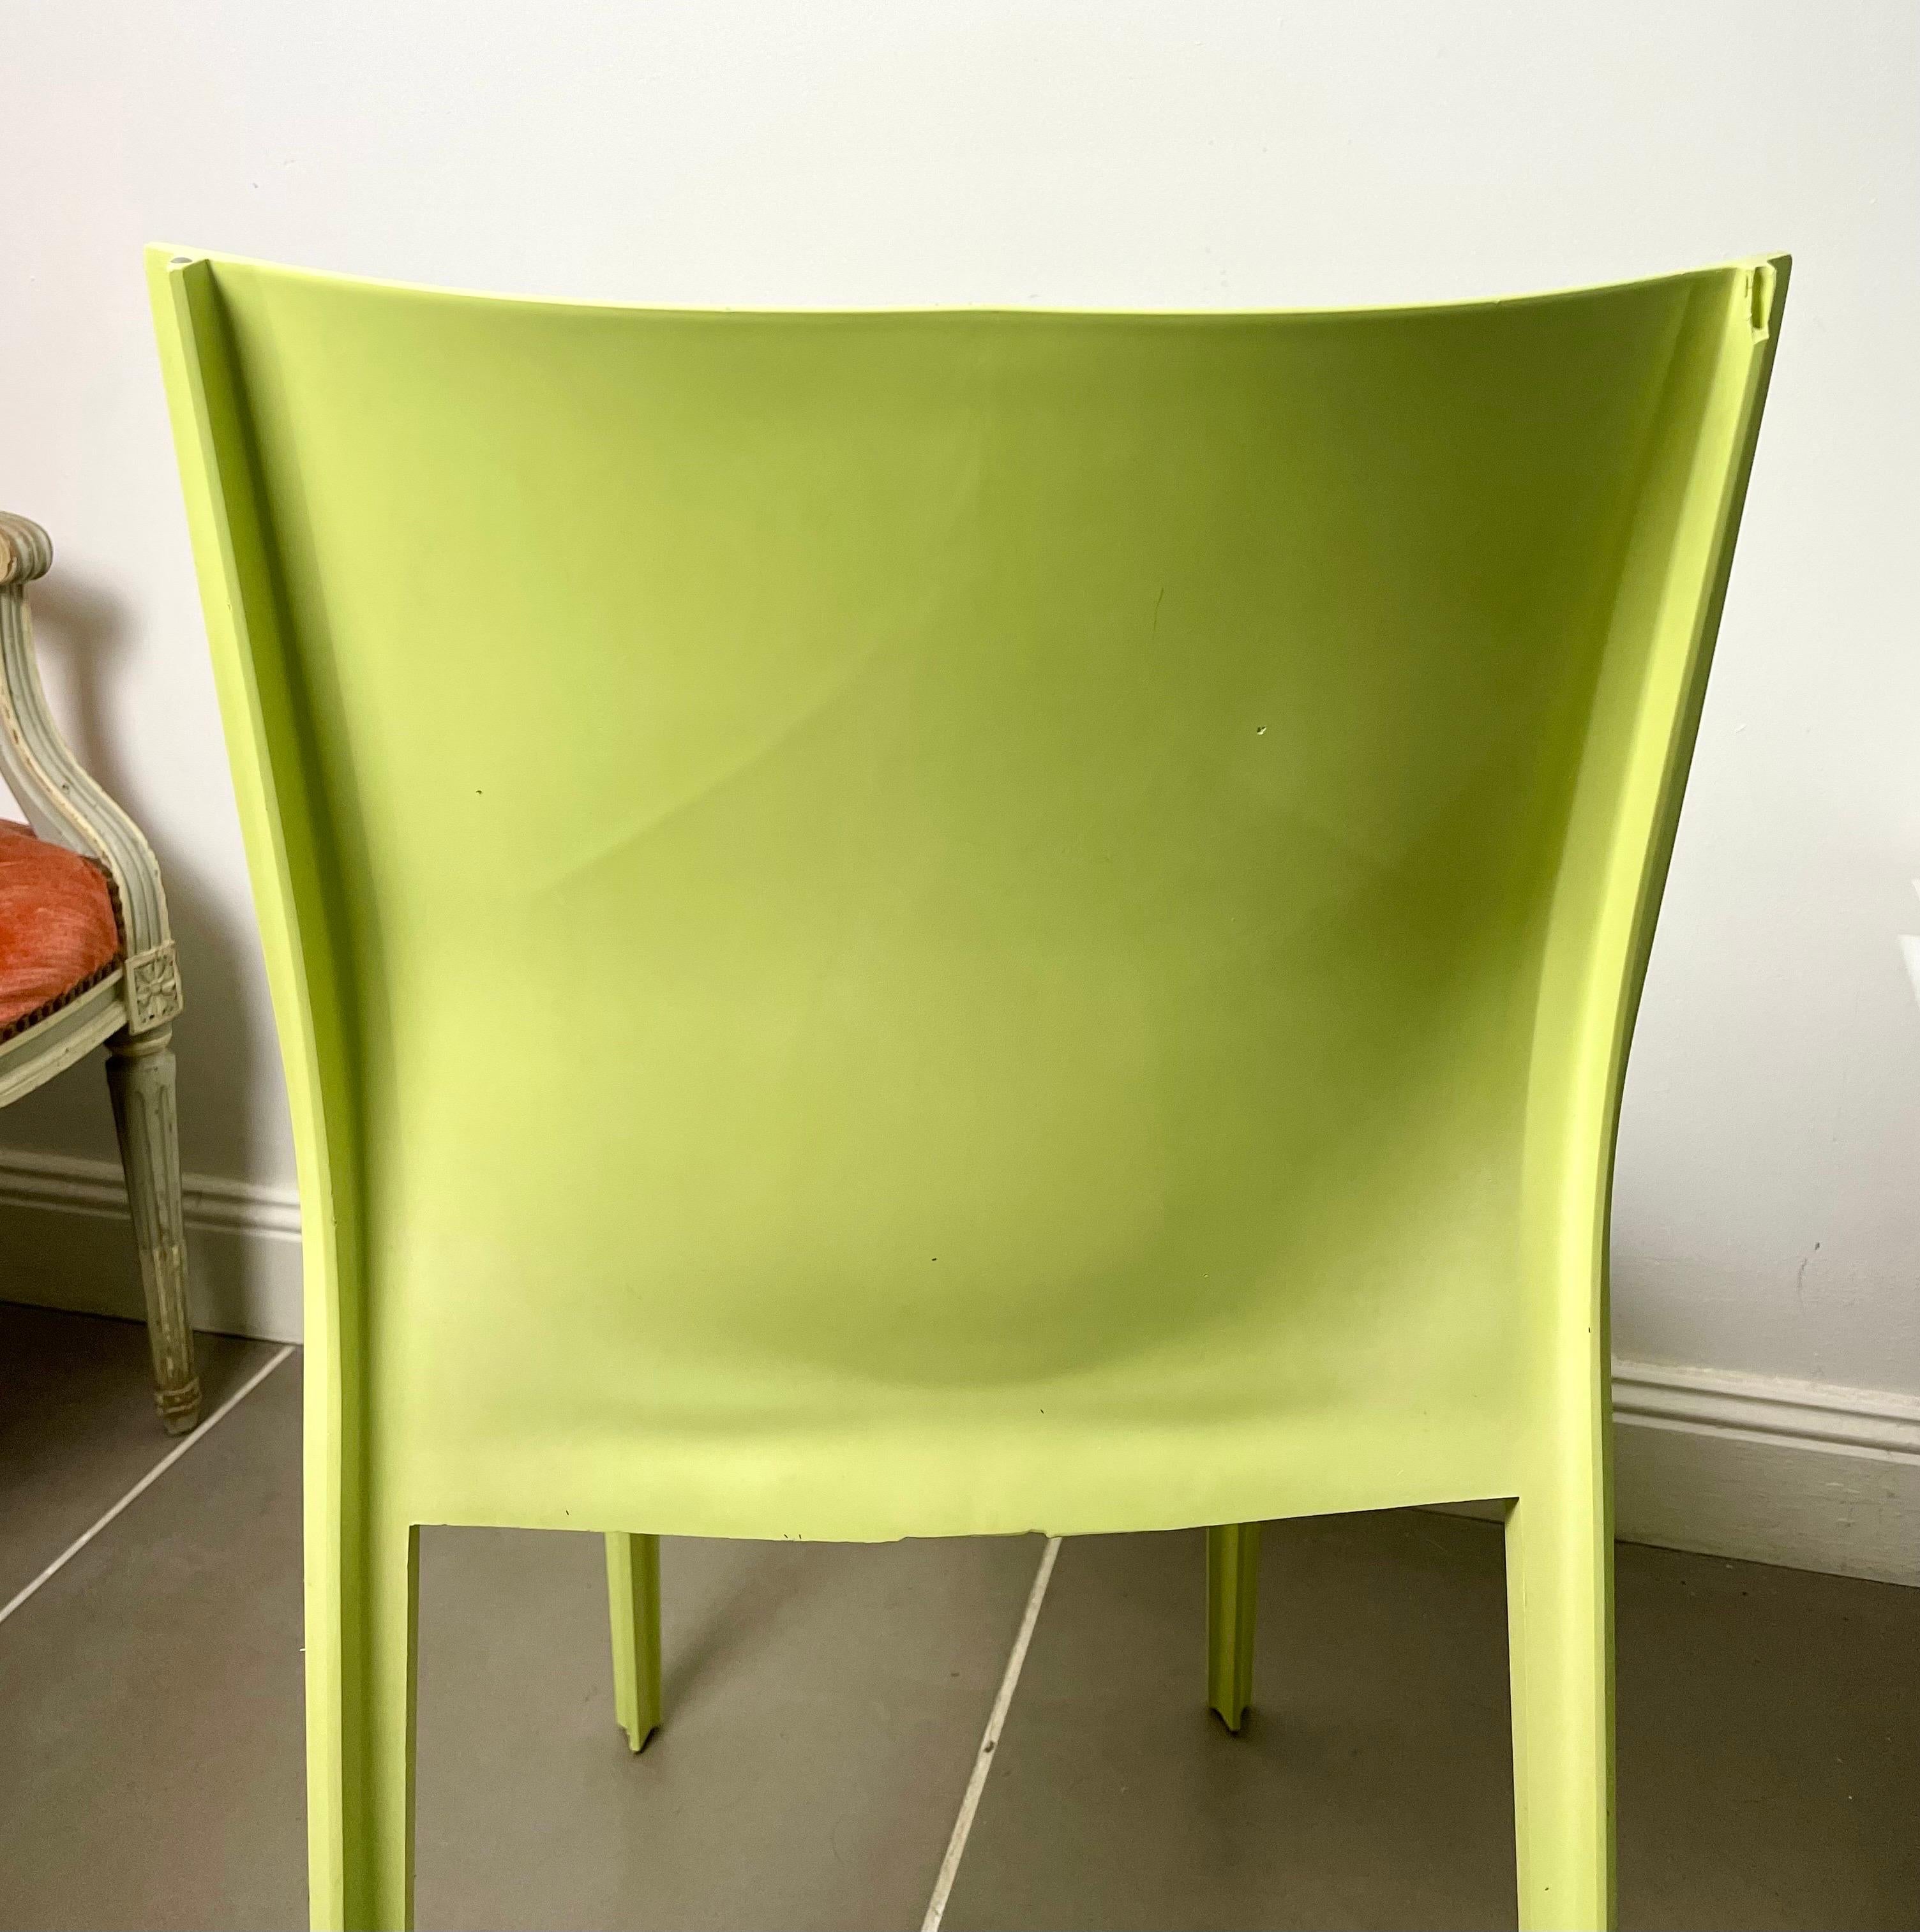 Philippe Starck, Set of 2 French Green Chairs, Design Slick Slick XO - France For Sale 4